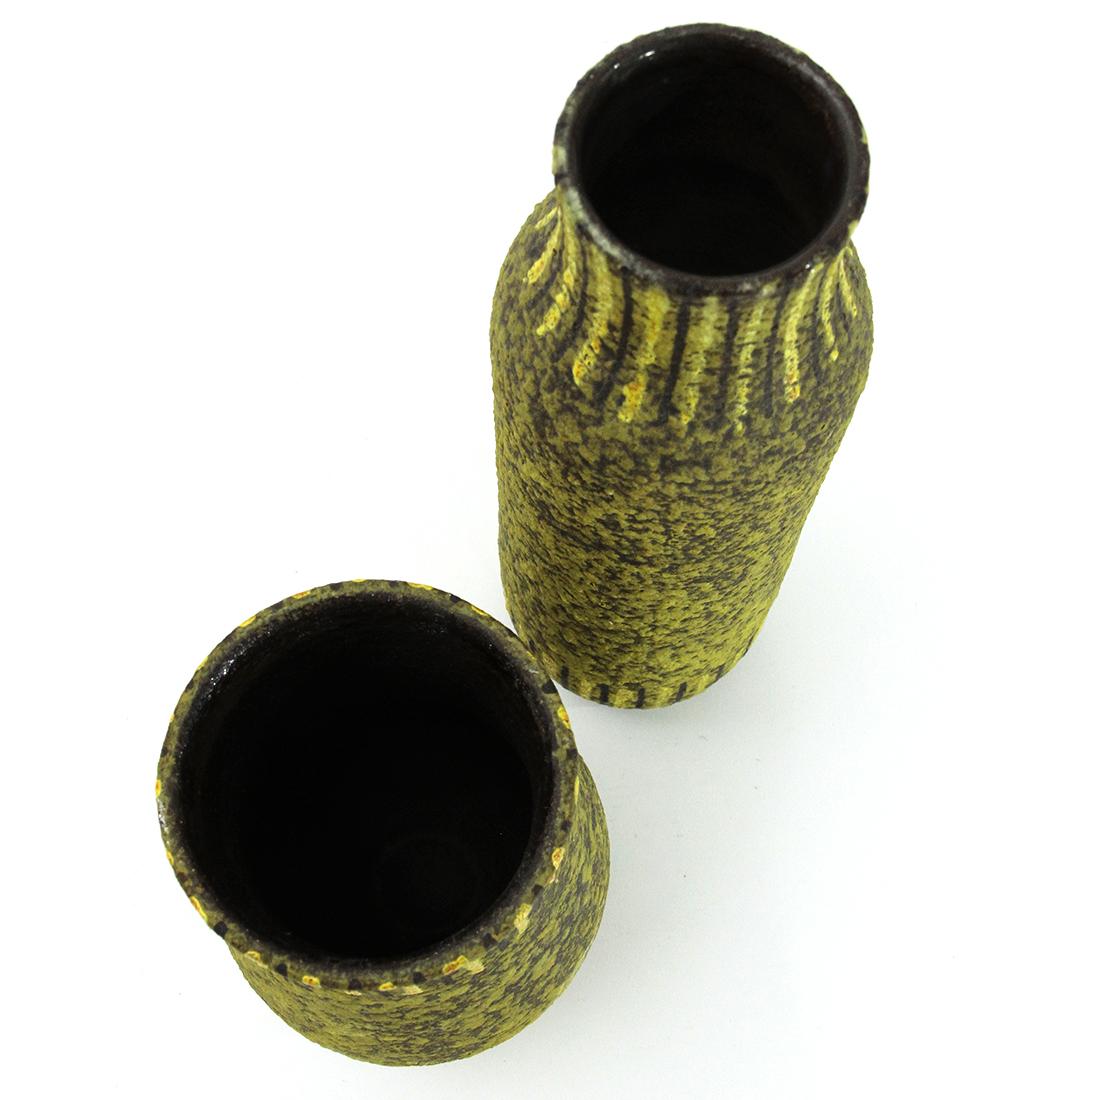 Pair of Italian manufacturing vases produced in the 1950s.
Glazed ceramic structure with lava effect, in black, yellow and red.
Good conditions.

Dimensions:
Small vase: Diameter 11 cm, height 20 cm
Large vase: Diameter 9 cm, height 30 cm.
 